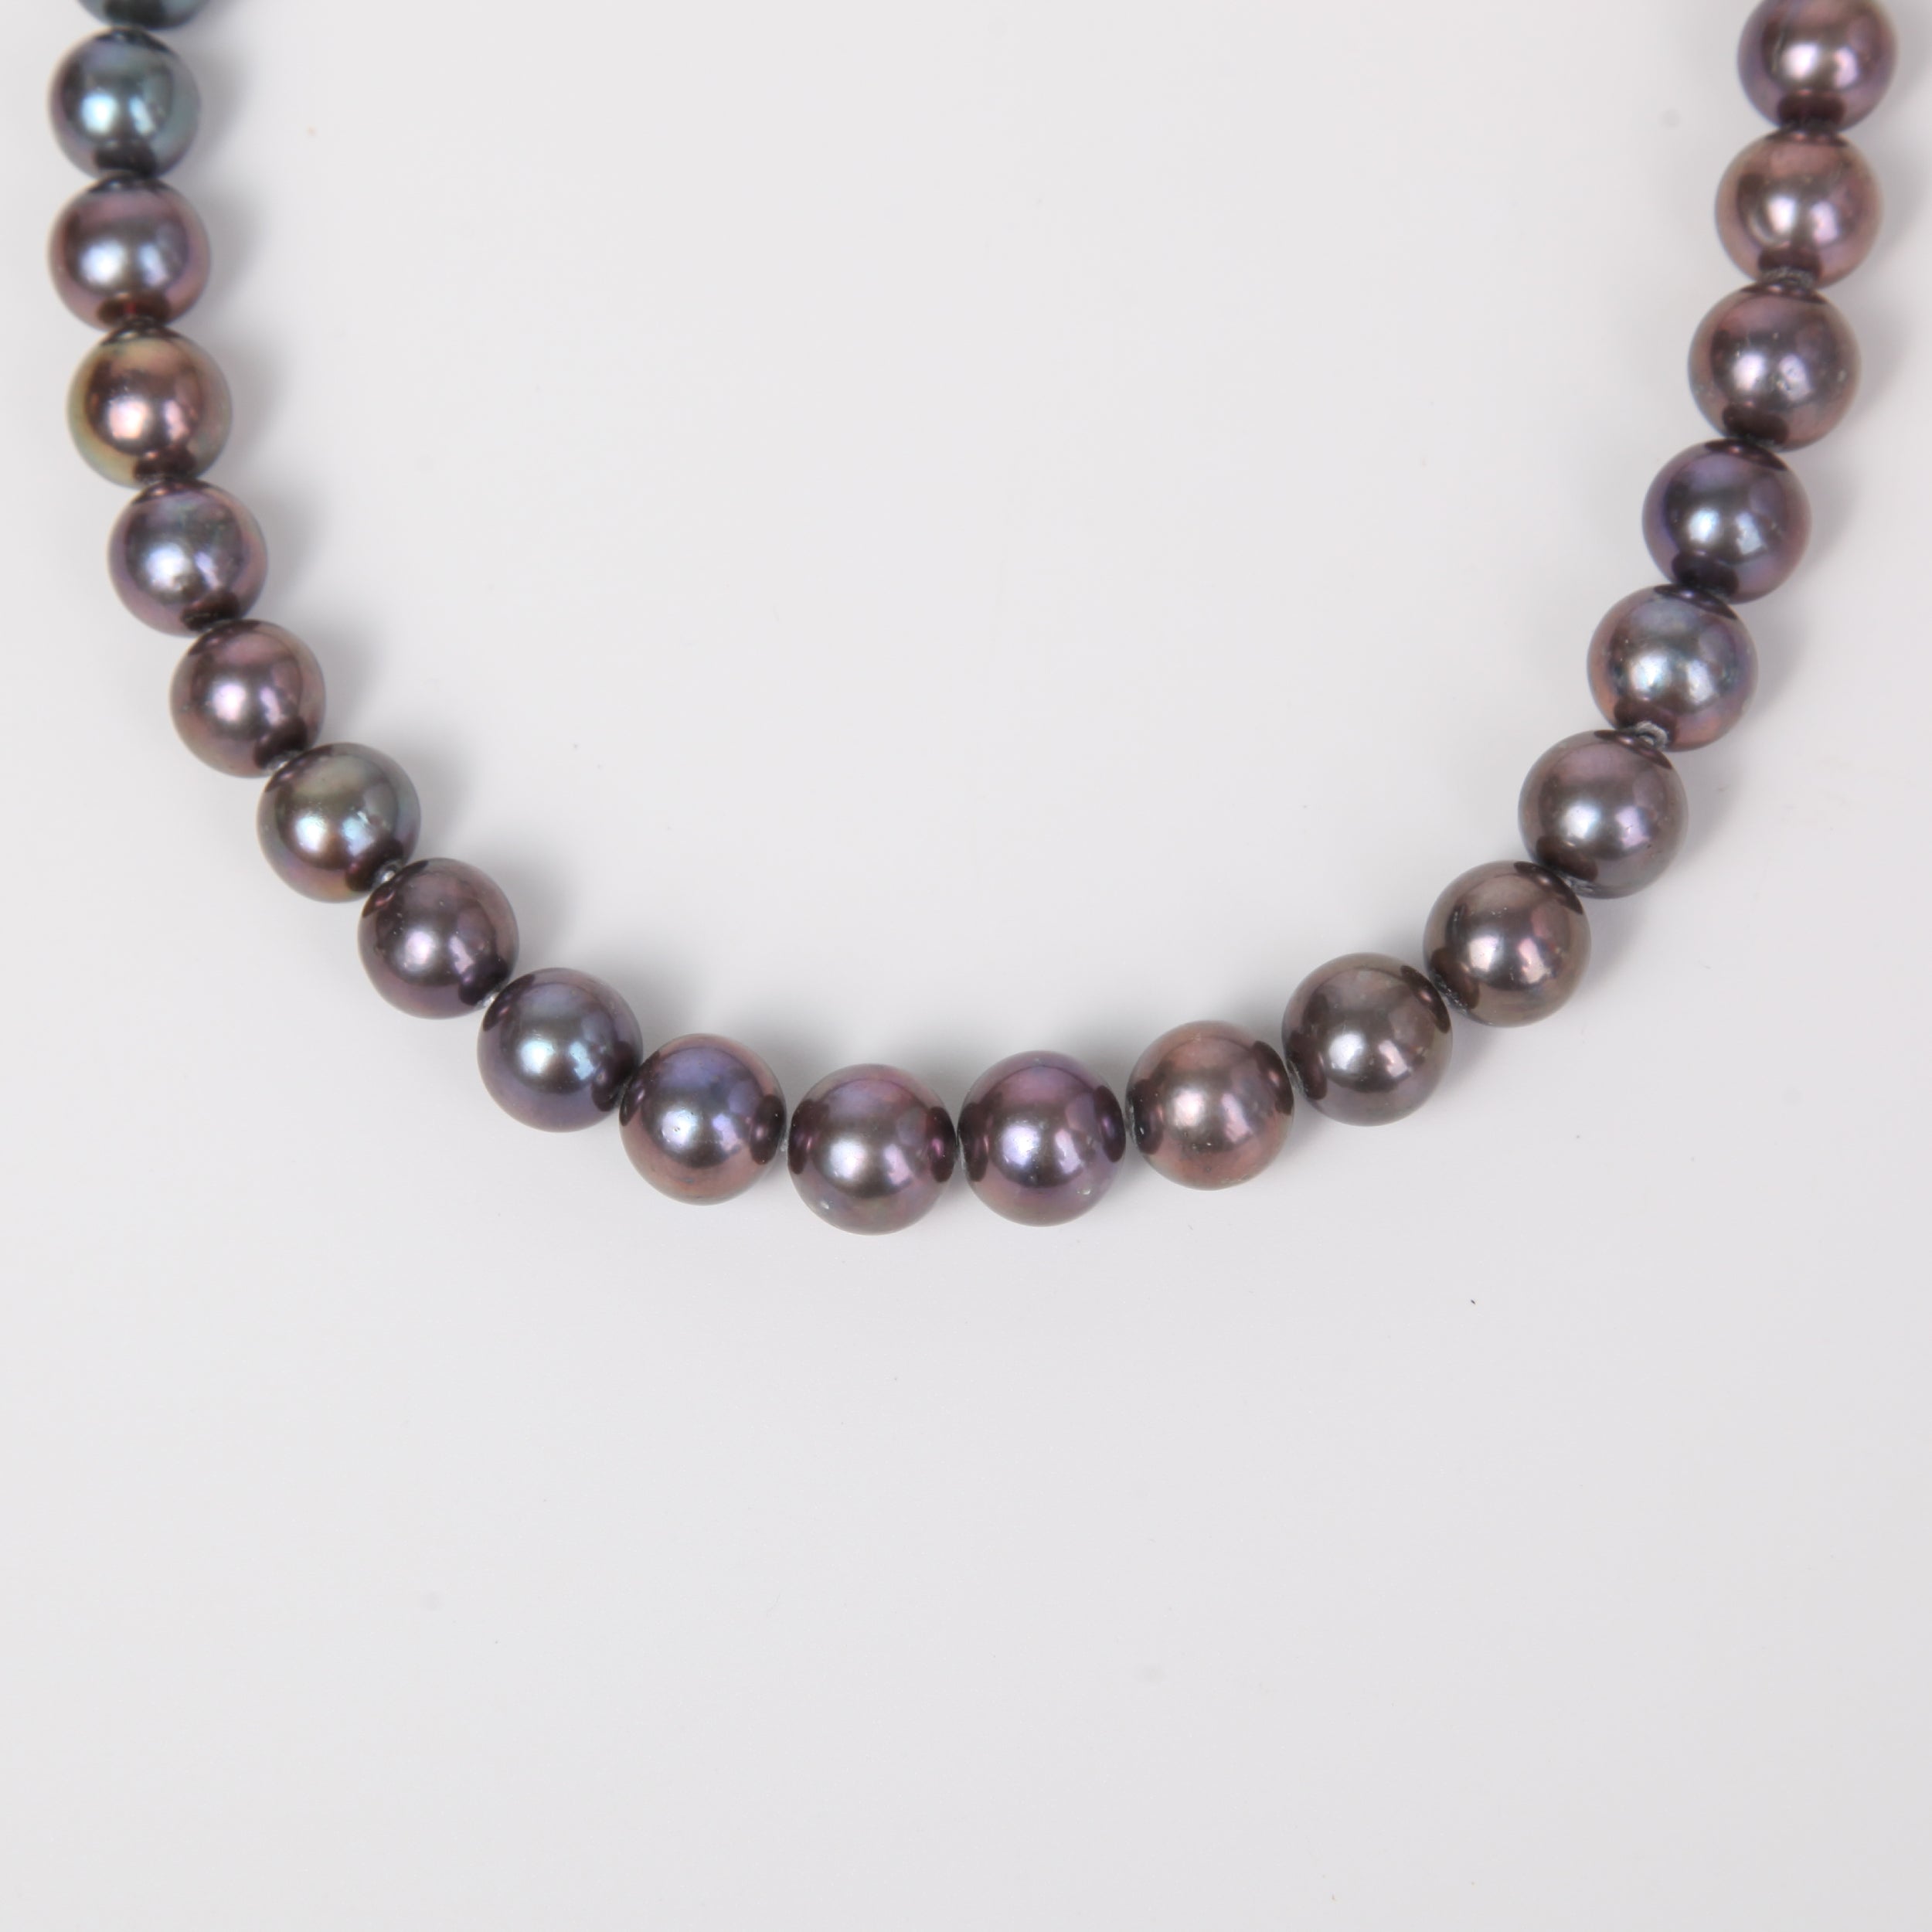 Dark Fresh Water Pearl Necklace with Sterling Silver